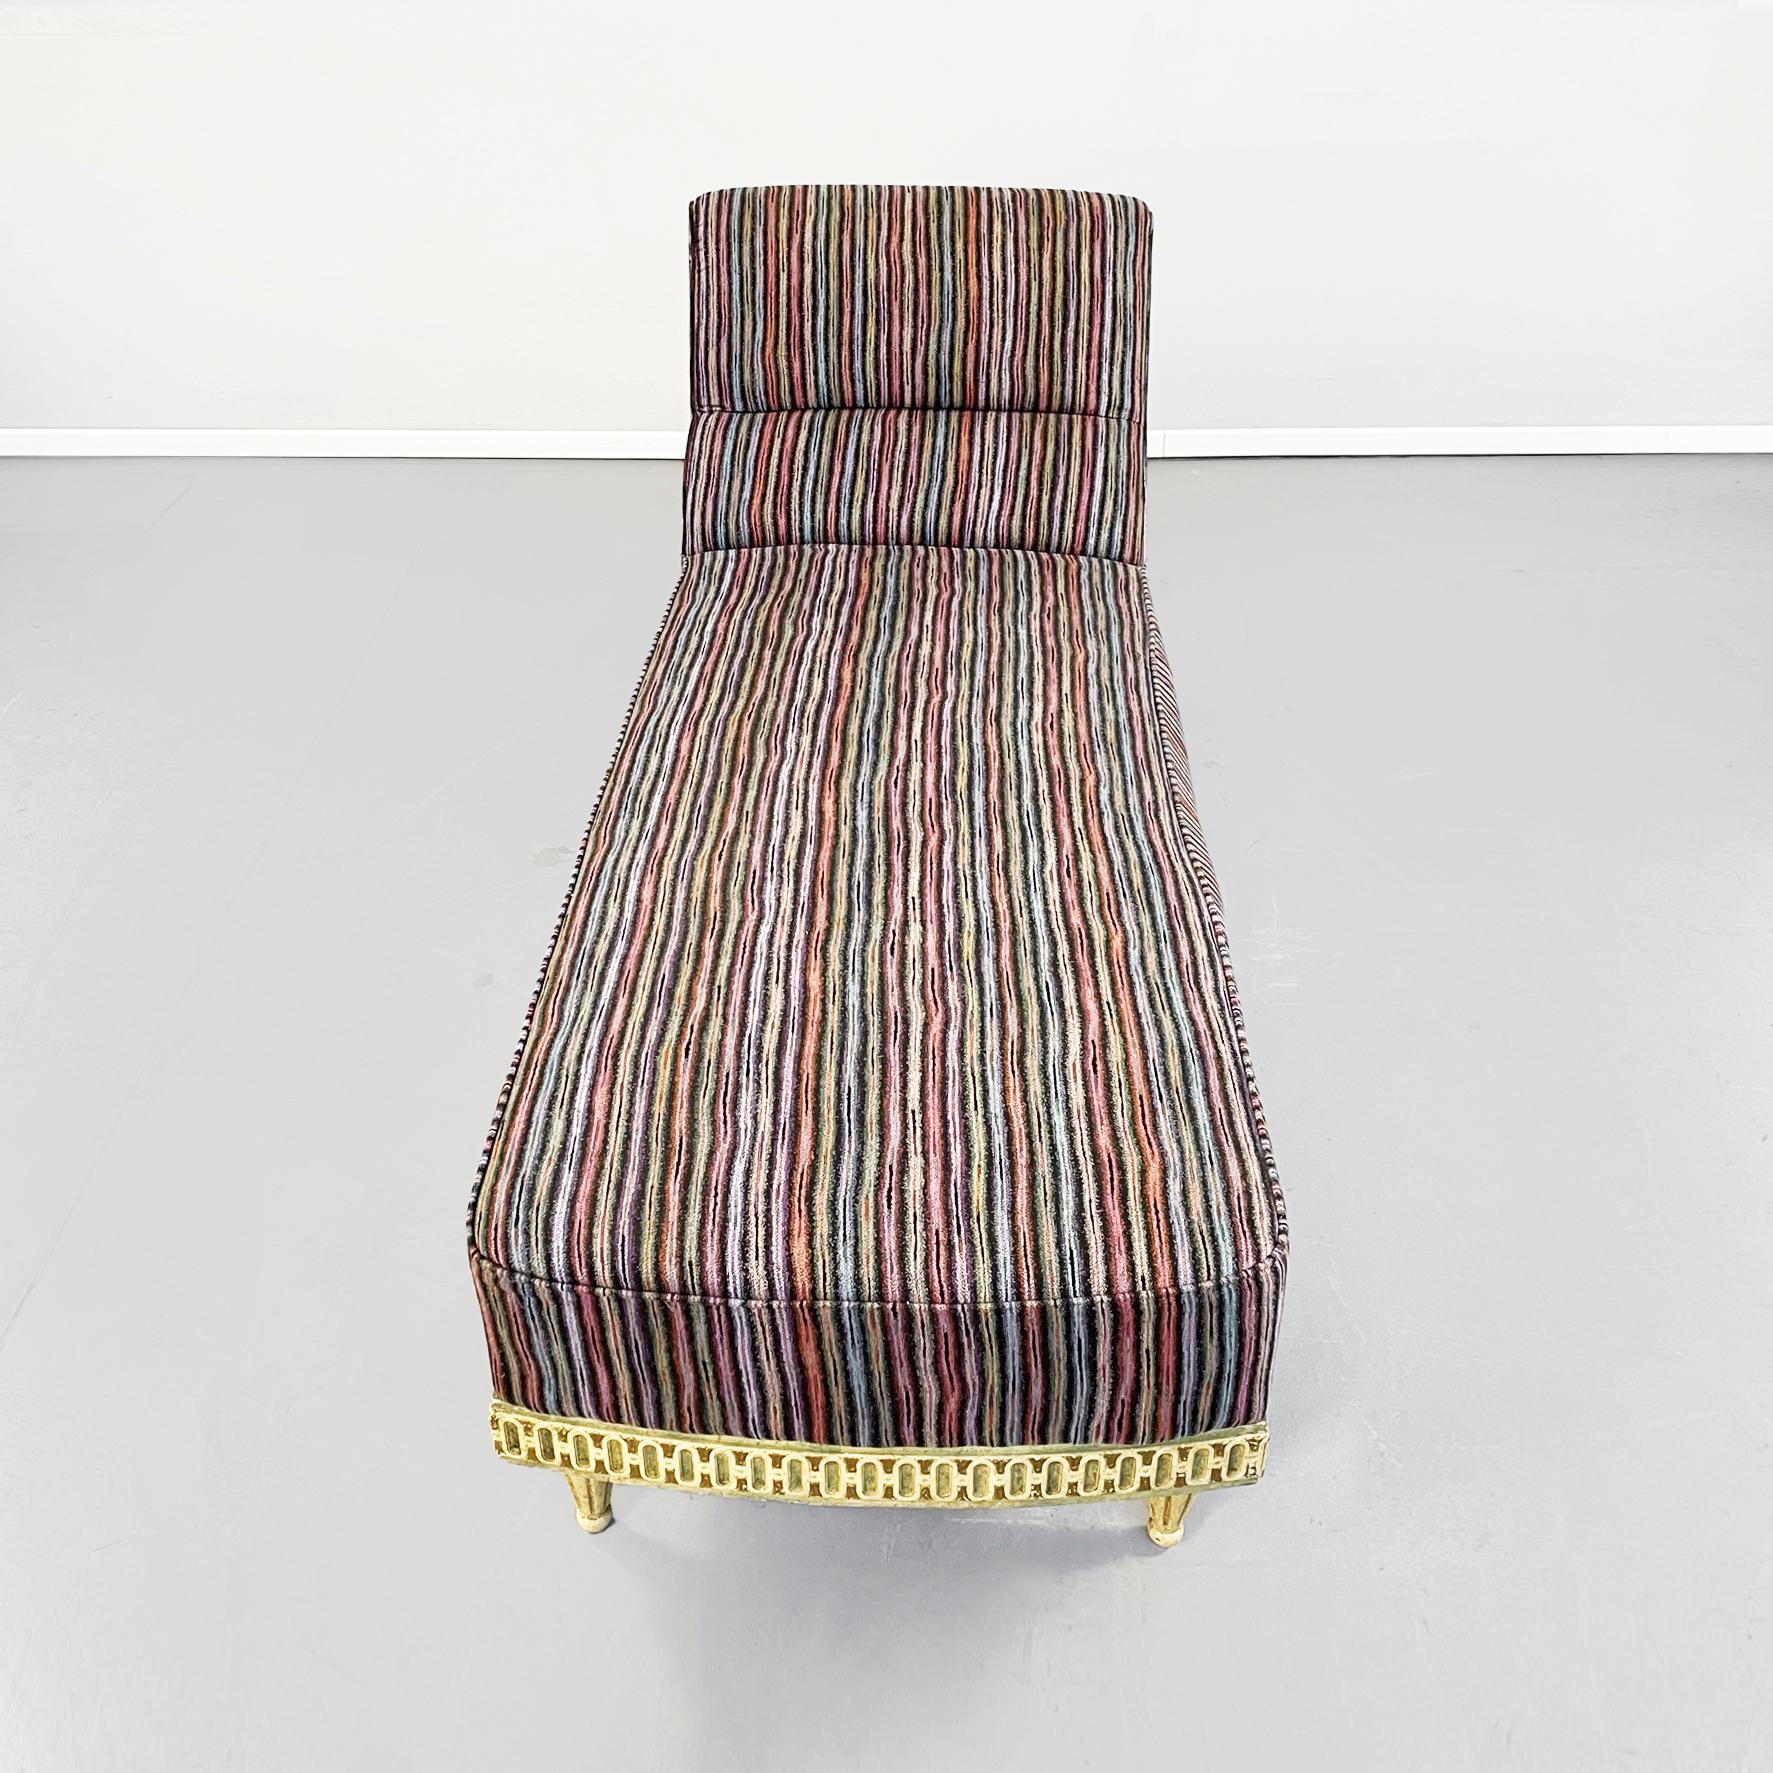 Mid-20th Century Italian Midcentury Venetian Style Chaise Longue with Missoni Striped Fabric, 1950 For Sale